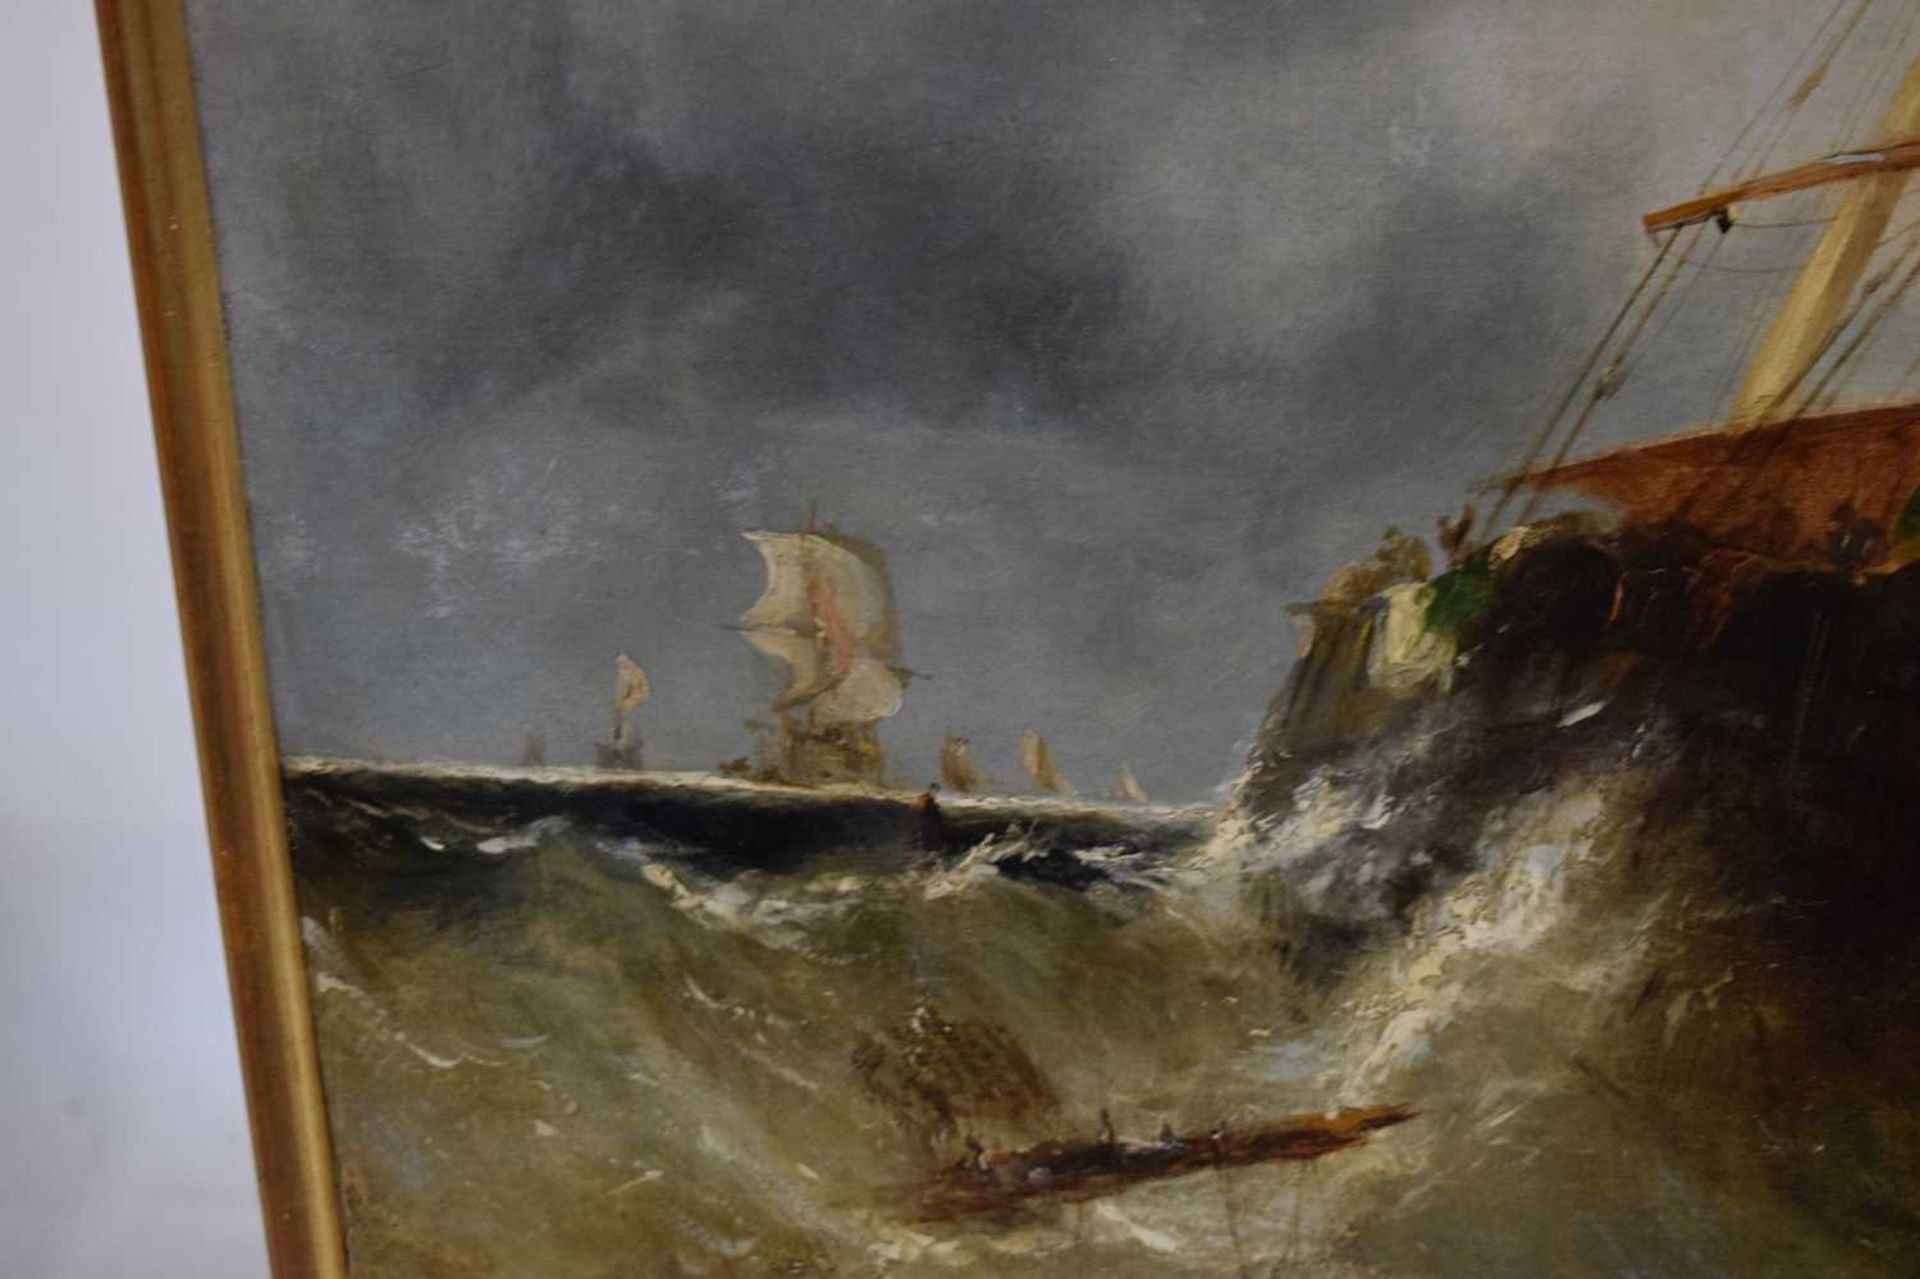 19th century continental school - Oil on canvas - Ship in a stormy coastal port - Image 11 of 19